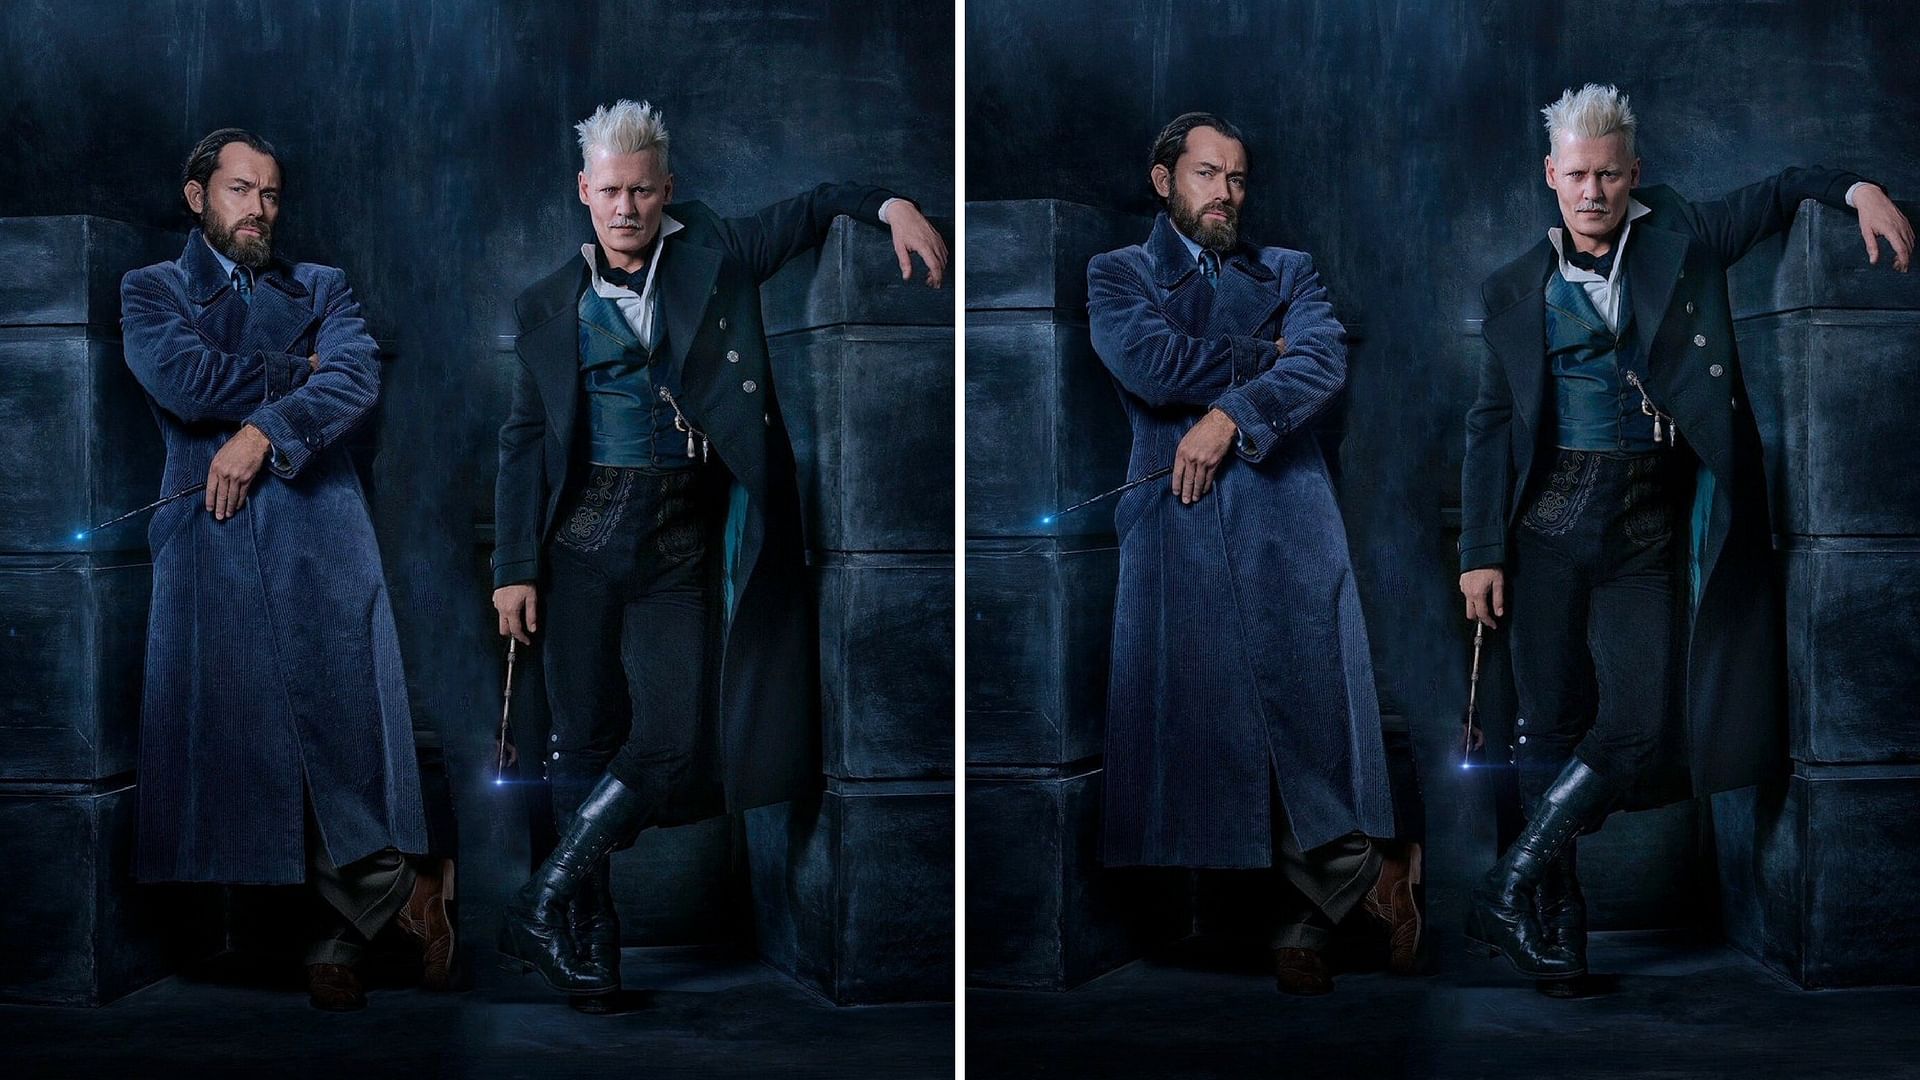 Jude Law and Johnny Depp steal the show in the new poster of <i>Fantastic Beasts: The Crimes of Grindelwald.</i>